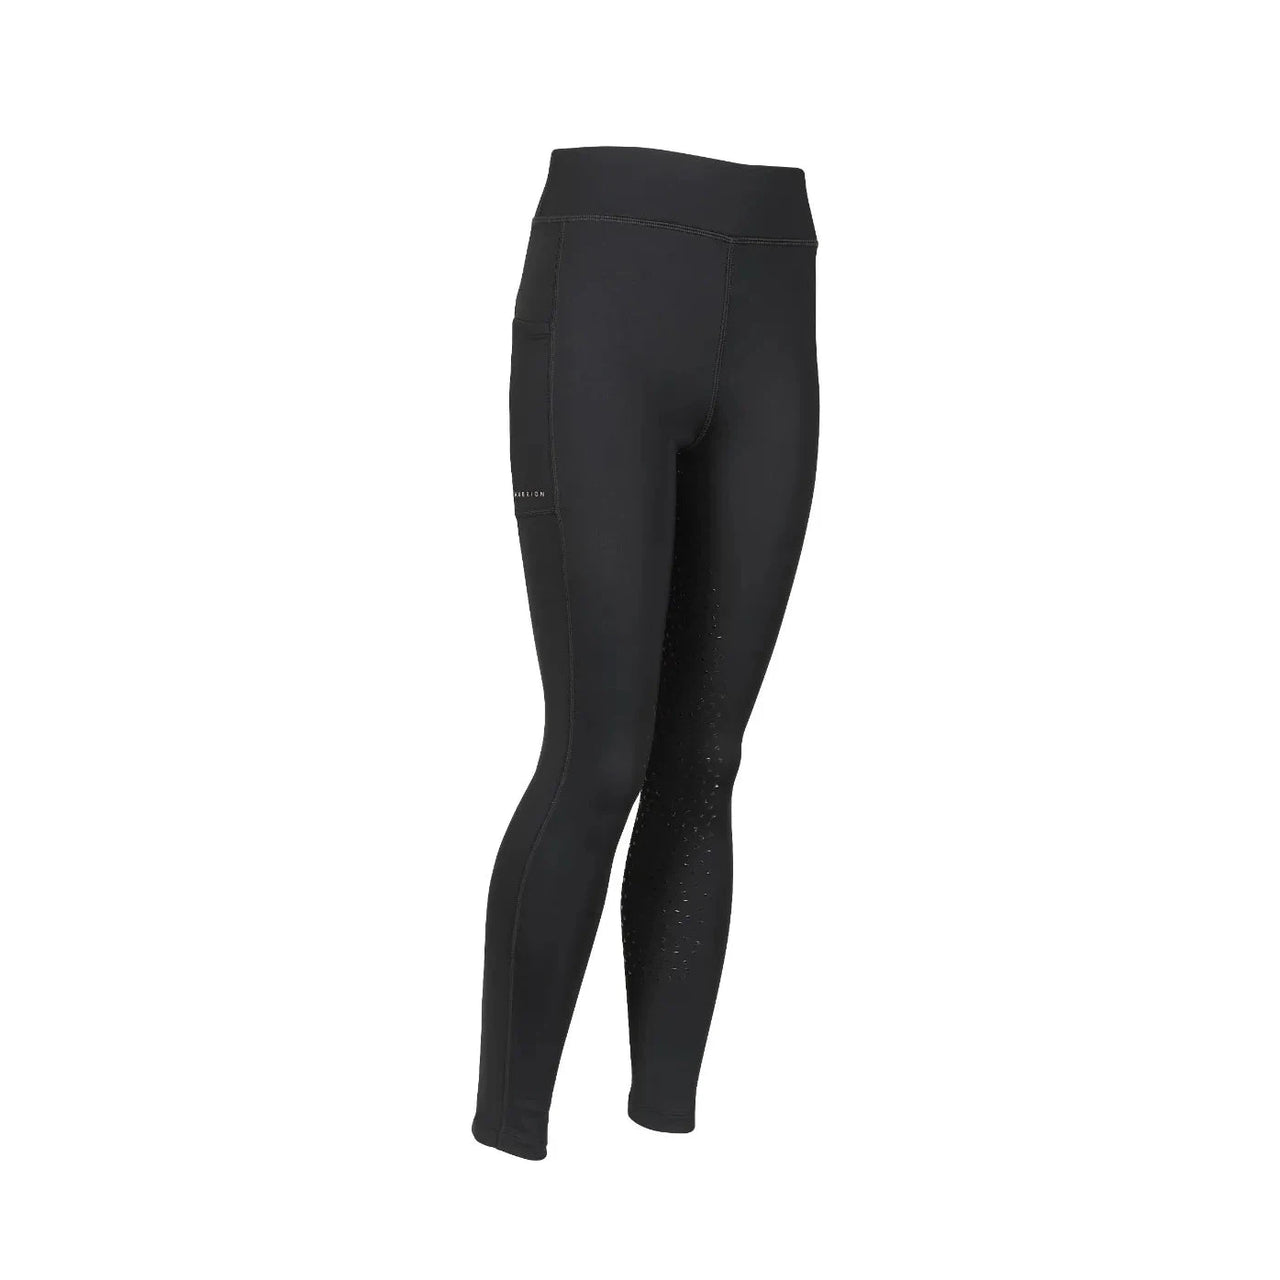 Young Rider - Winter Thermal Riding Leggings - Black